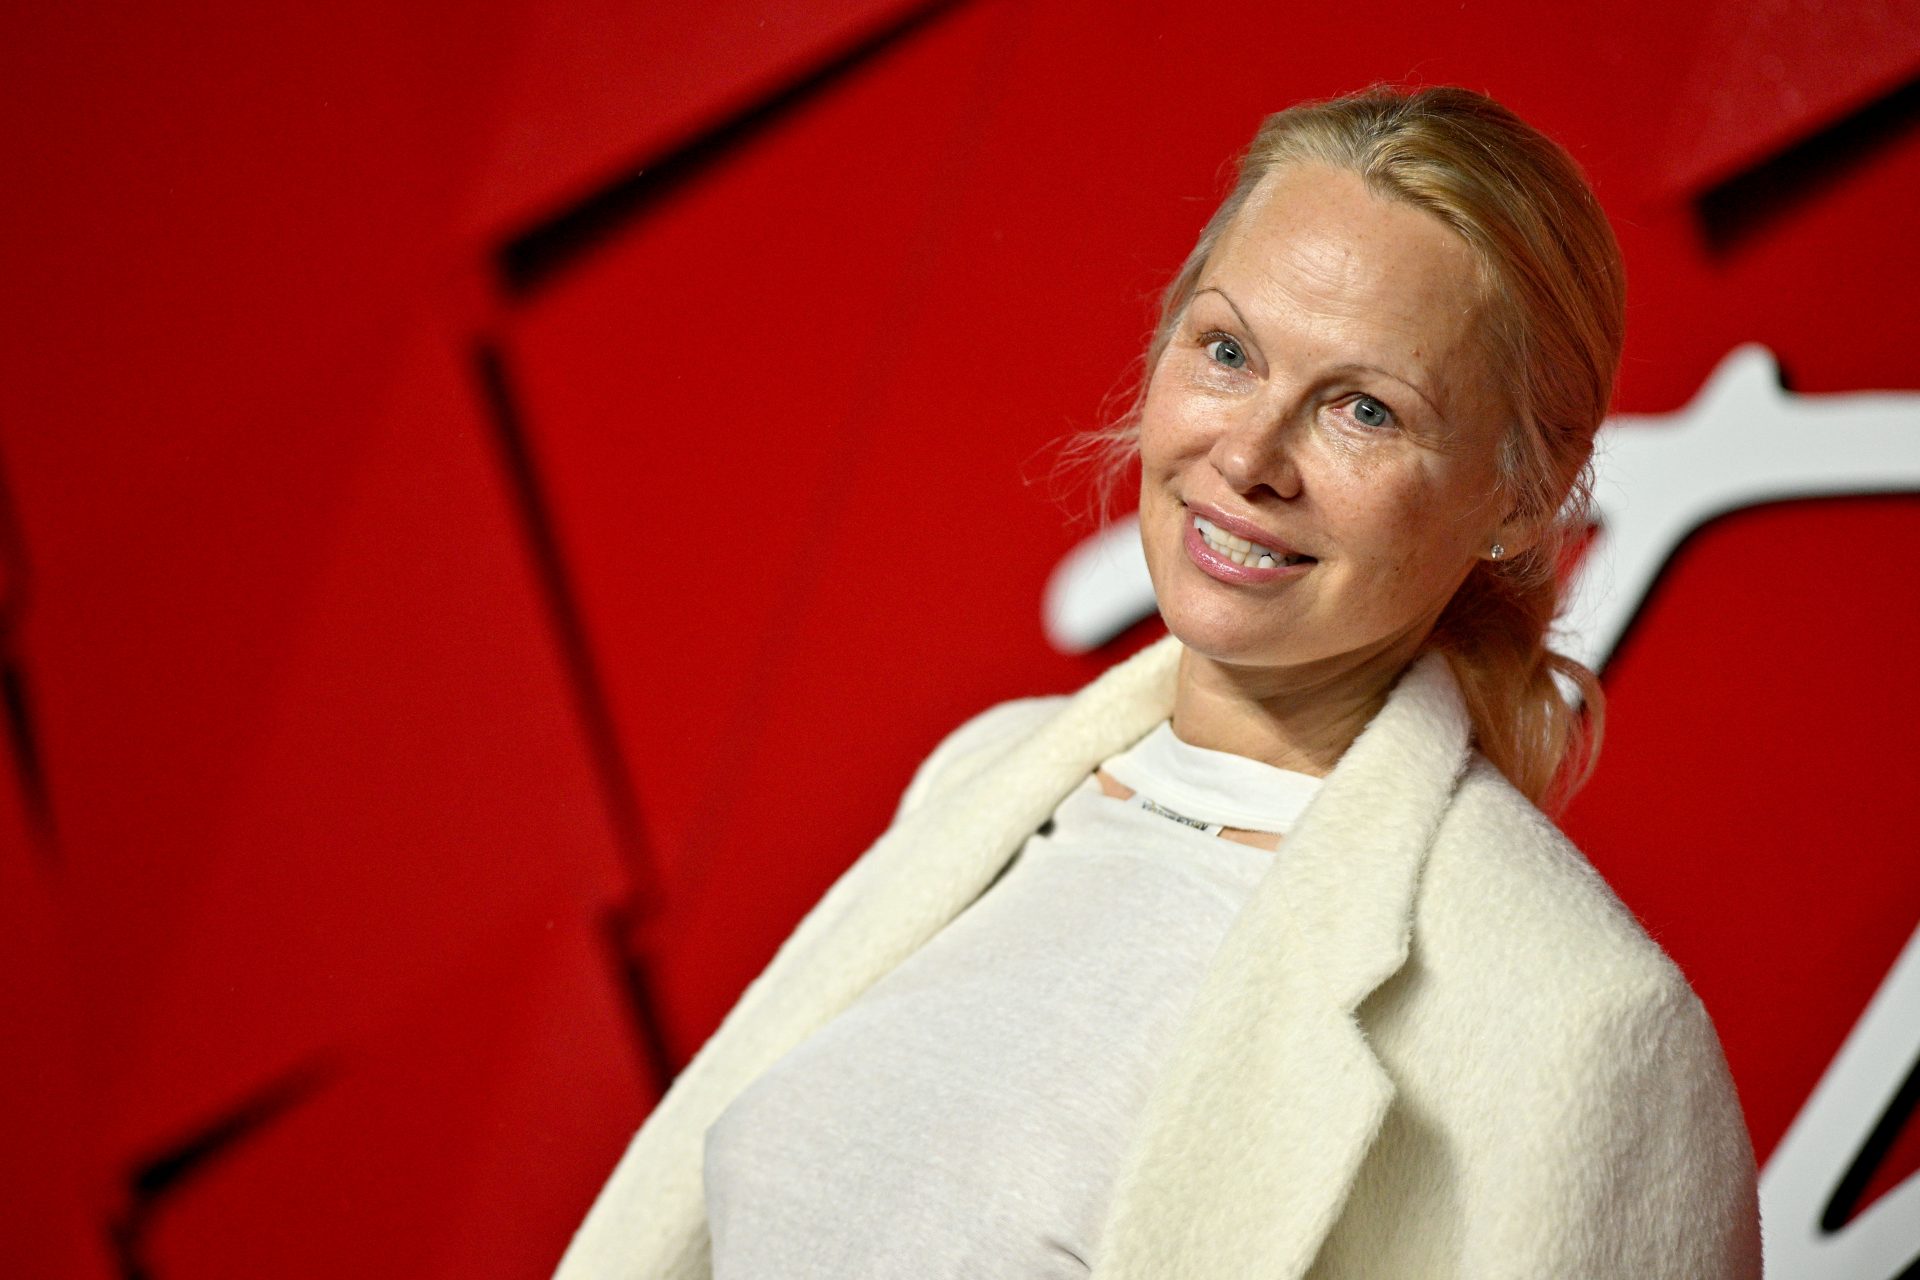 Pamela Anderson vowed never to wear make-up again and she looks amazing